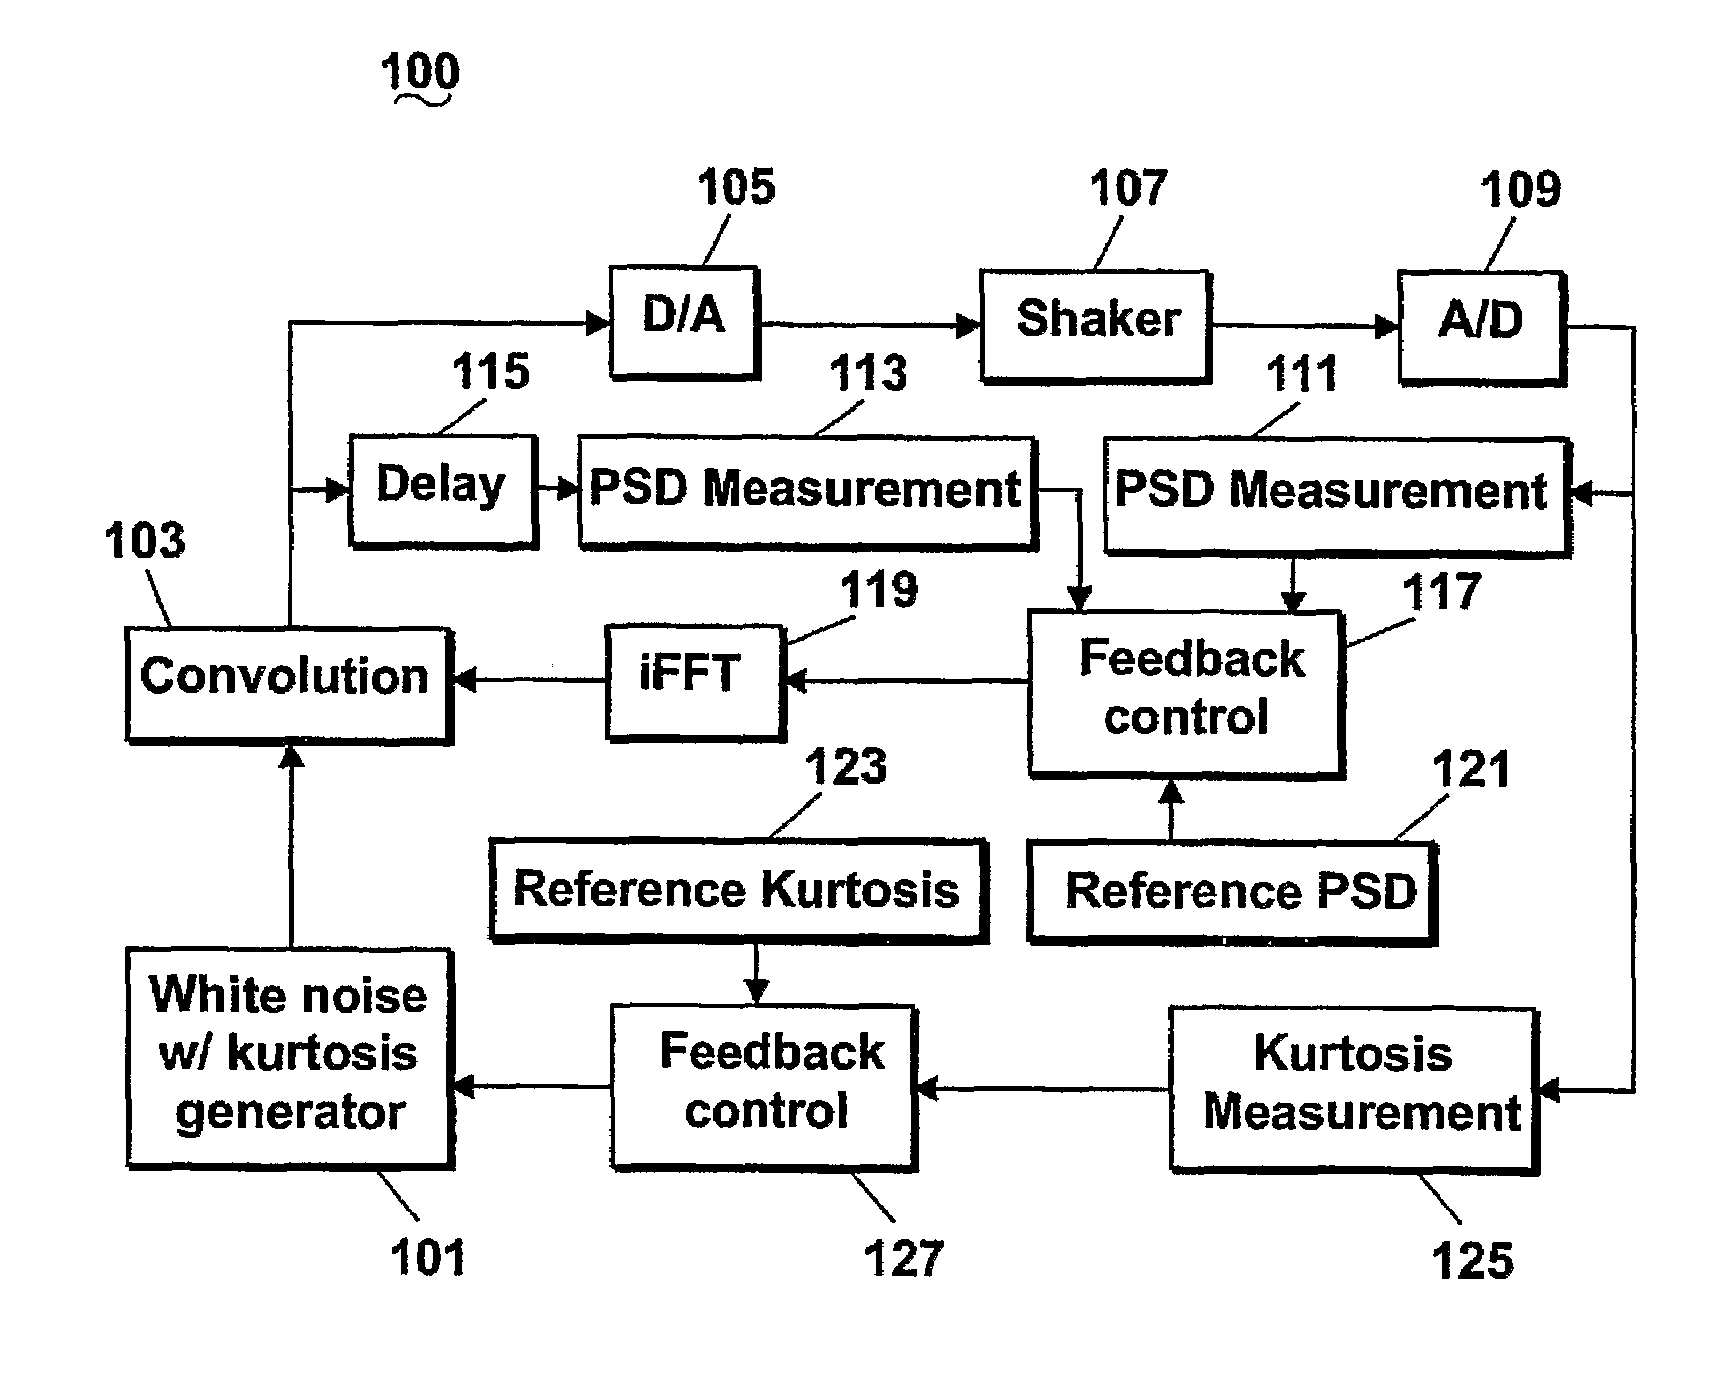 System and method for simultaneously controlling spectrum and kurtosis of a random vibration